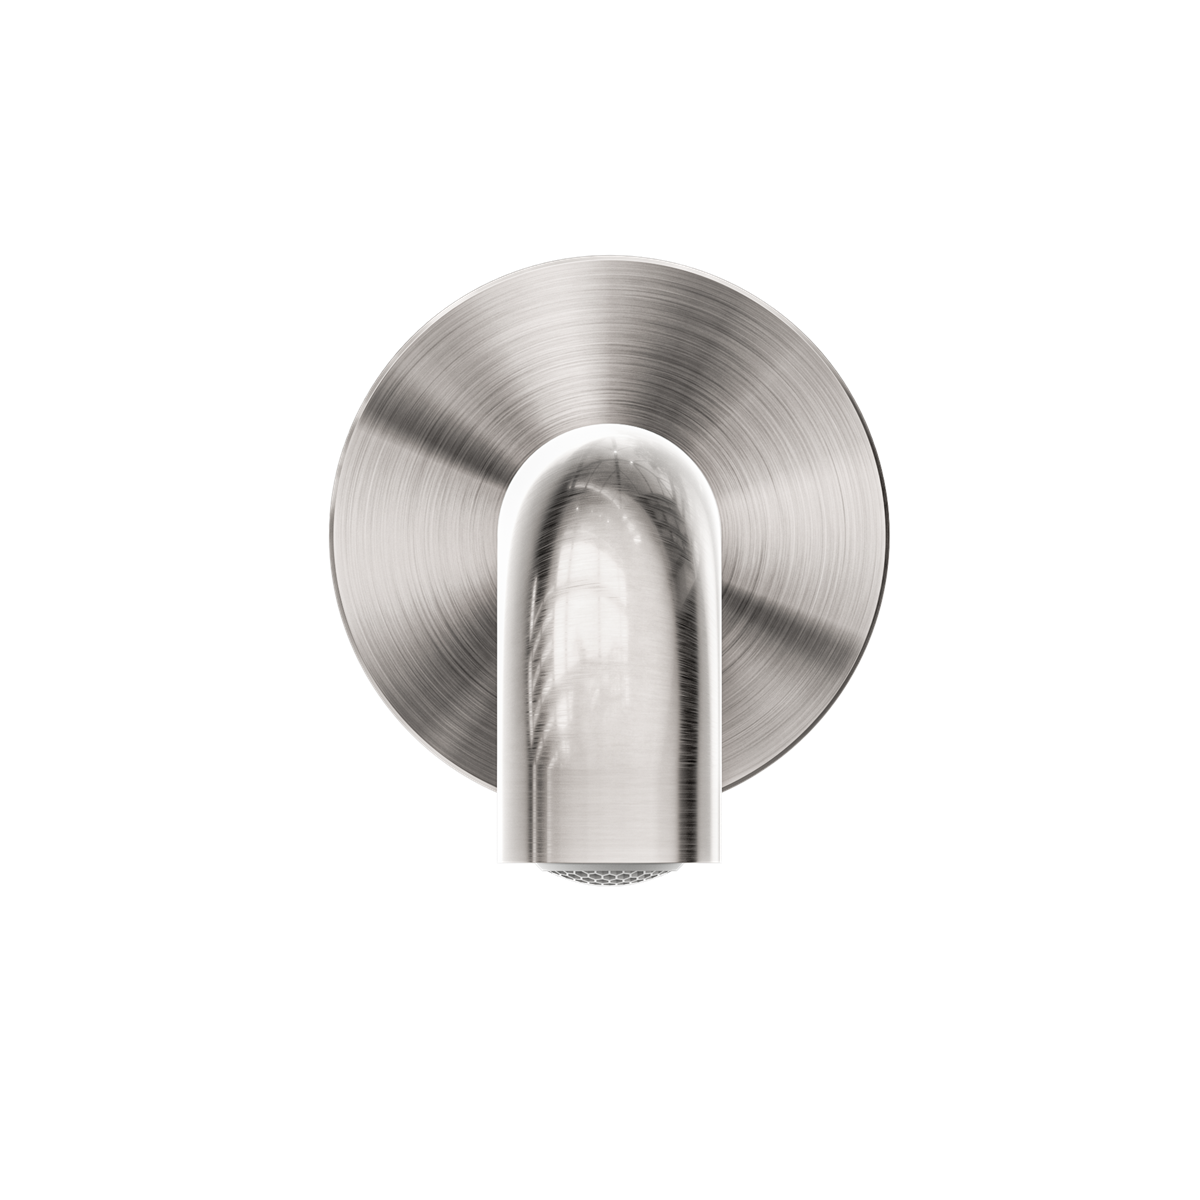 NERO MECCA BASIN/ BATH SPOUT BRUSHED NICKEL (AVAILABLE IN 120MM,160MM,185MM, 230MM AND 260MM)